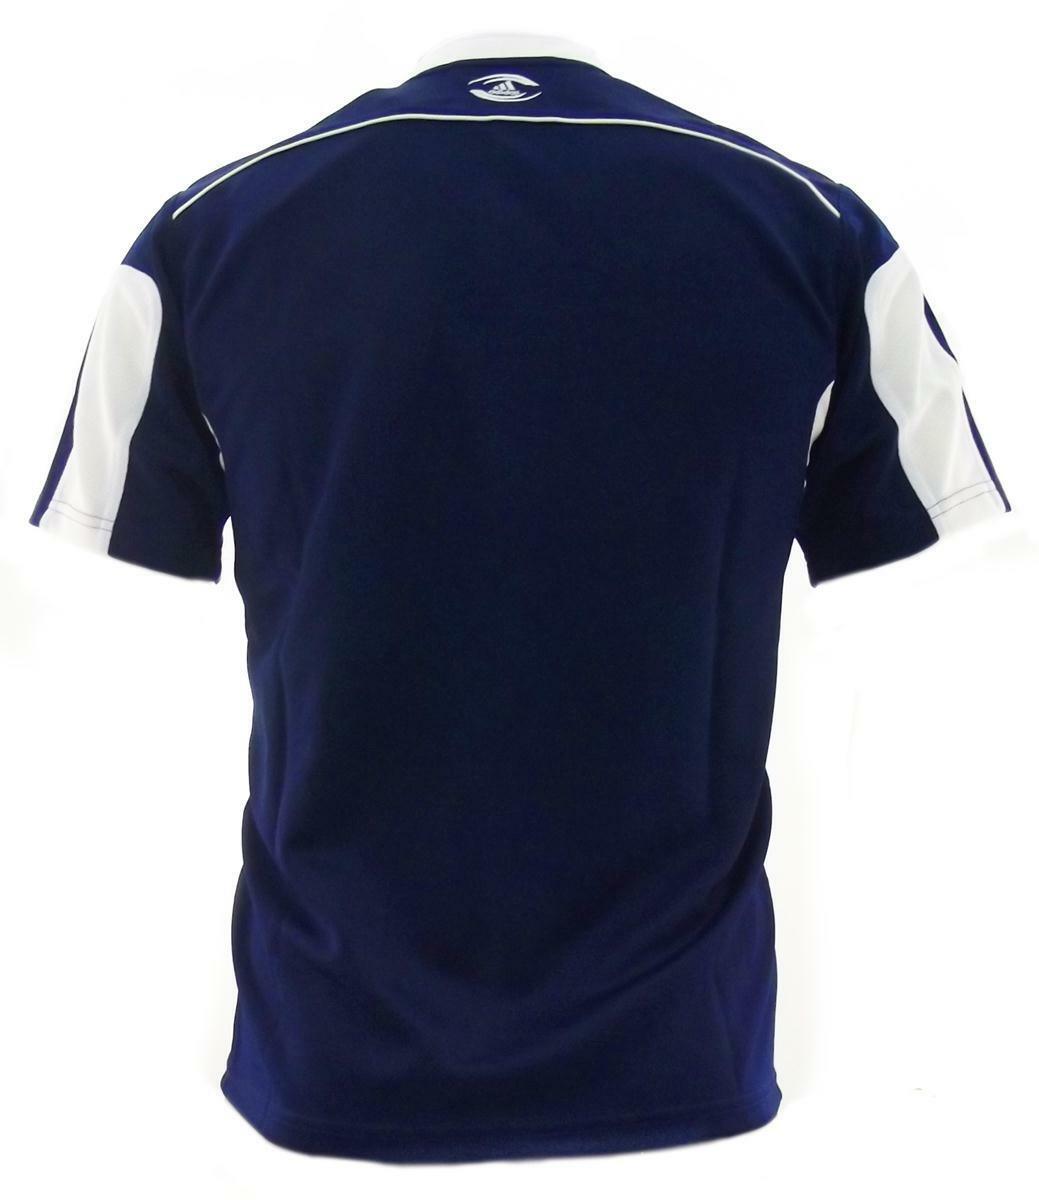 Rugby Heaven Adidas 3 Stripe Kids Navy/White Match Rugby Shirt - www.rugby-heaven.co.uk